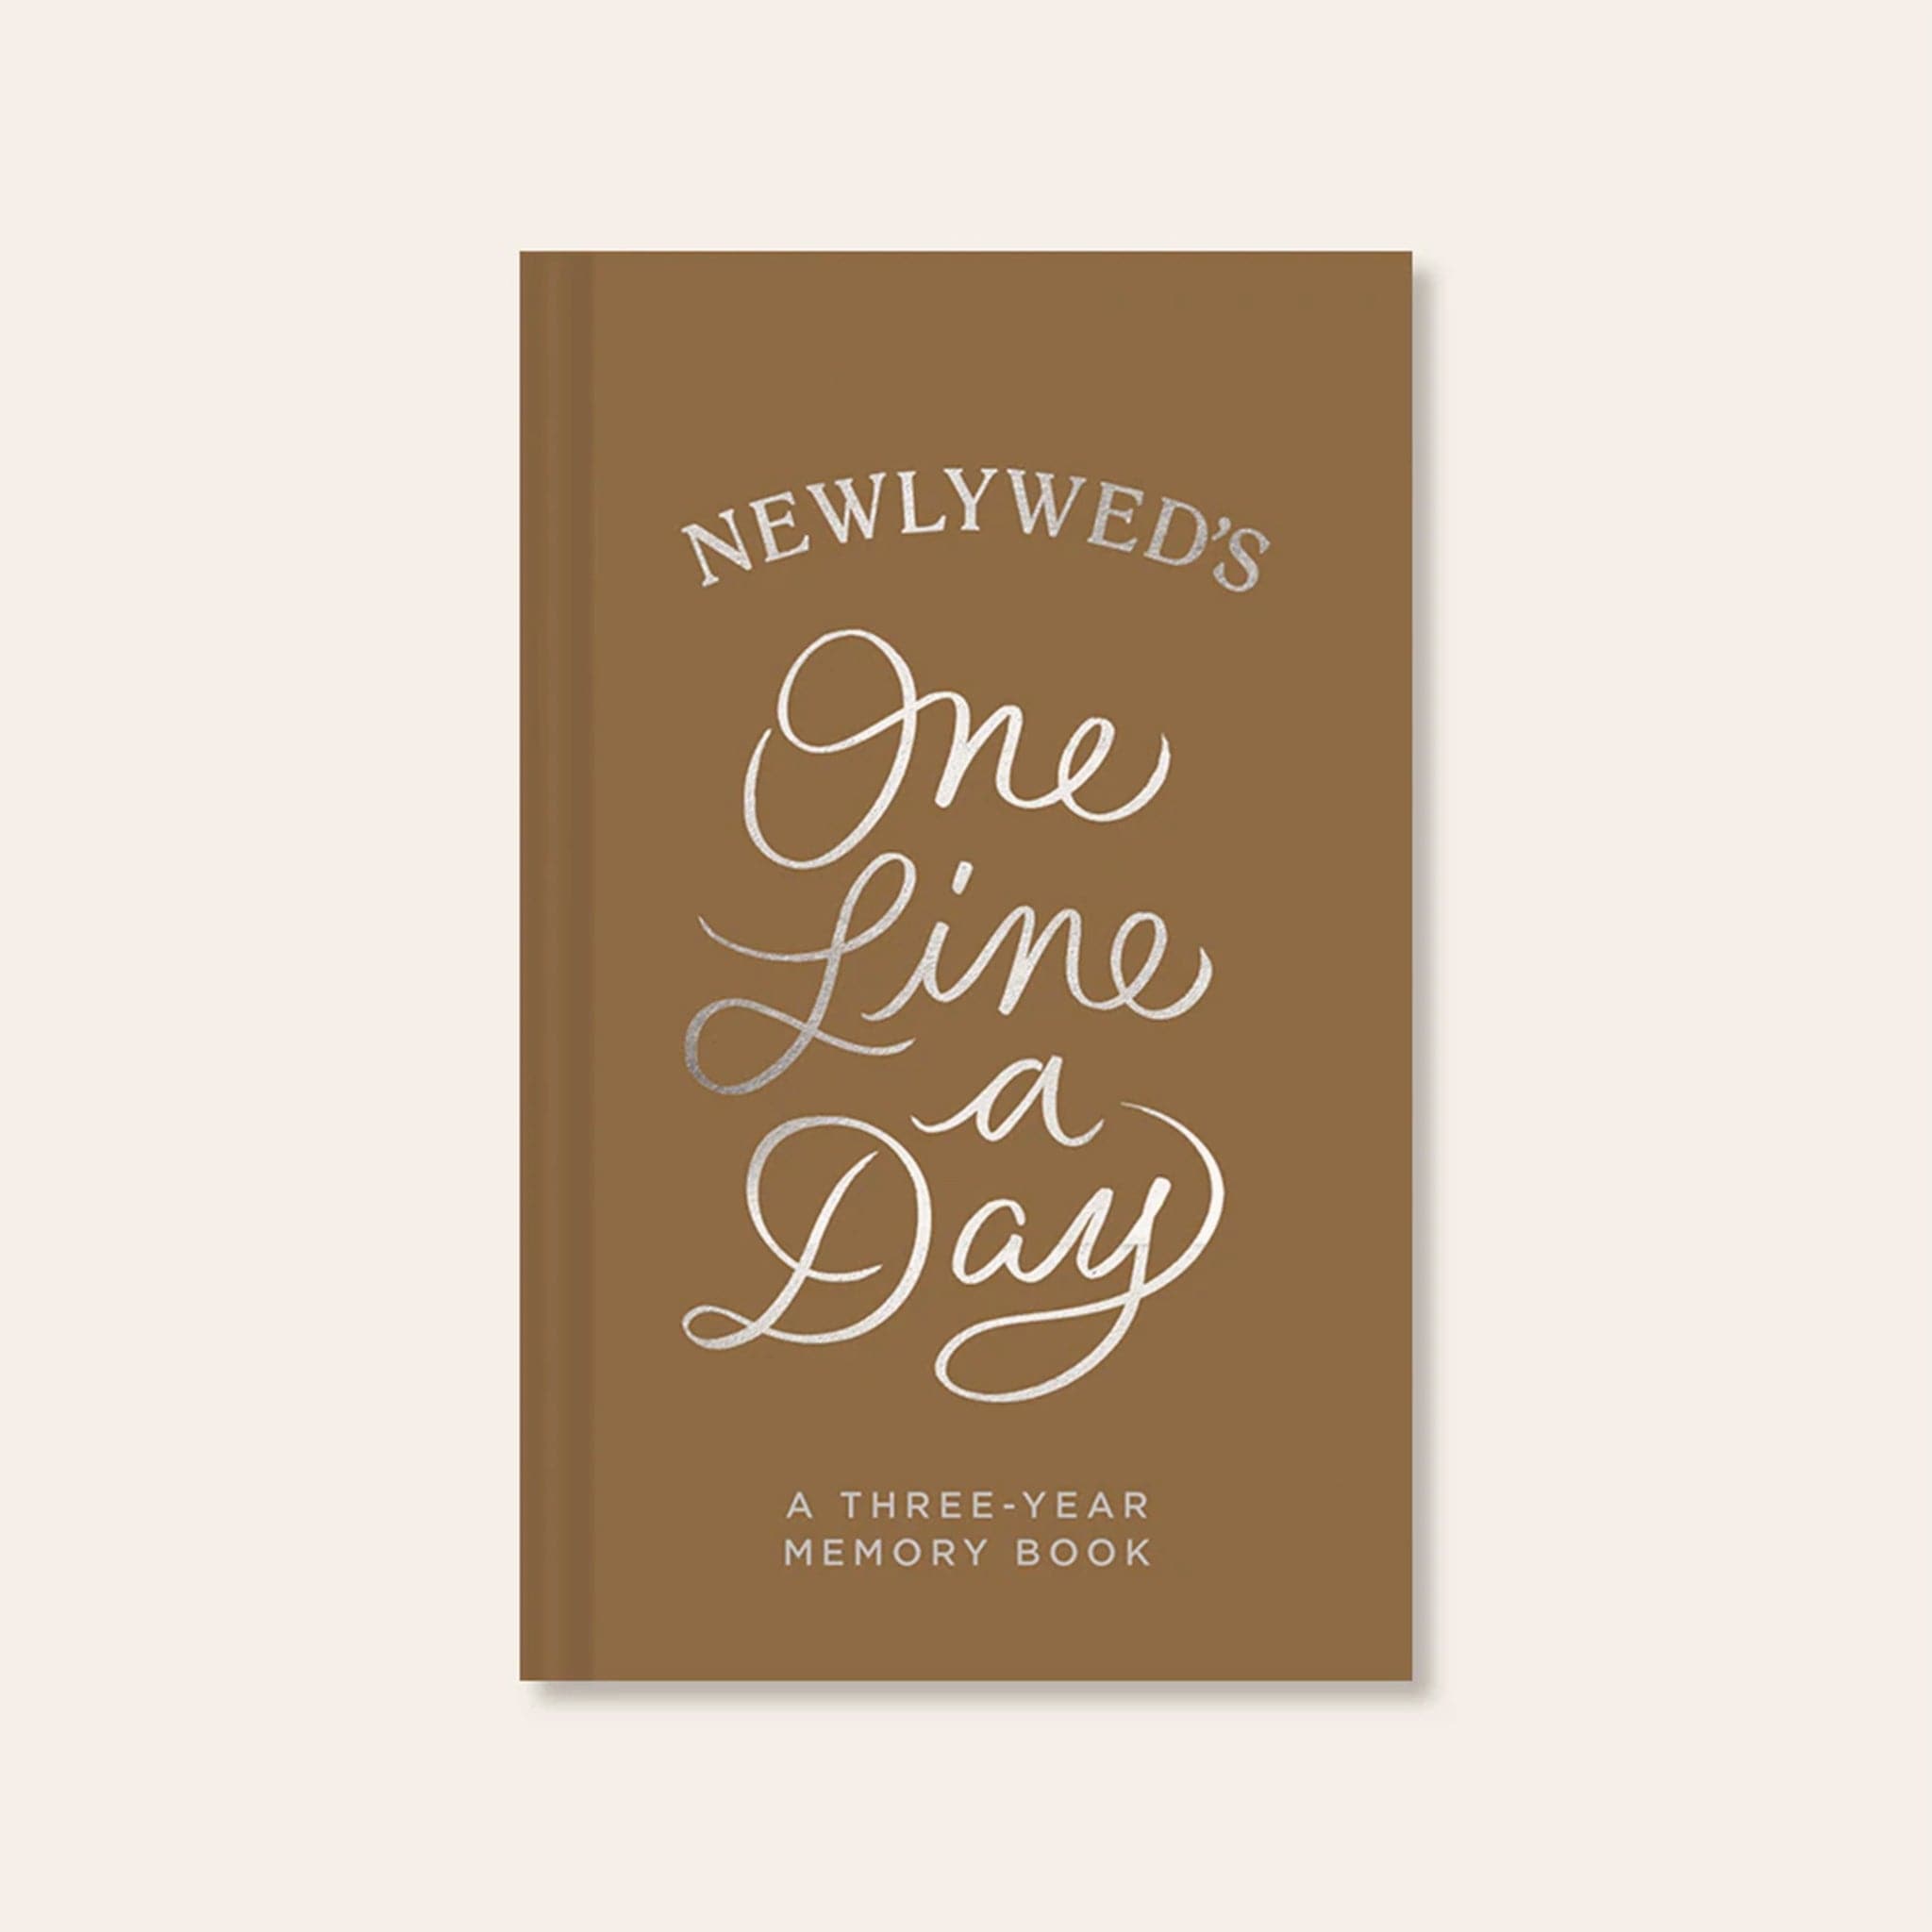 High quality, honey toned memory book reading &#39;Newlywed&#39;s one line a day; a three year memory book&#39; in silver foil lettering across the padded cover.